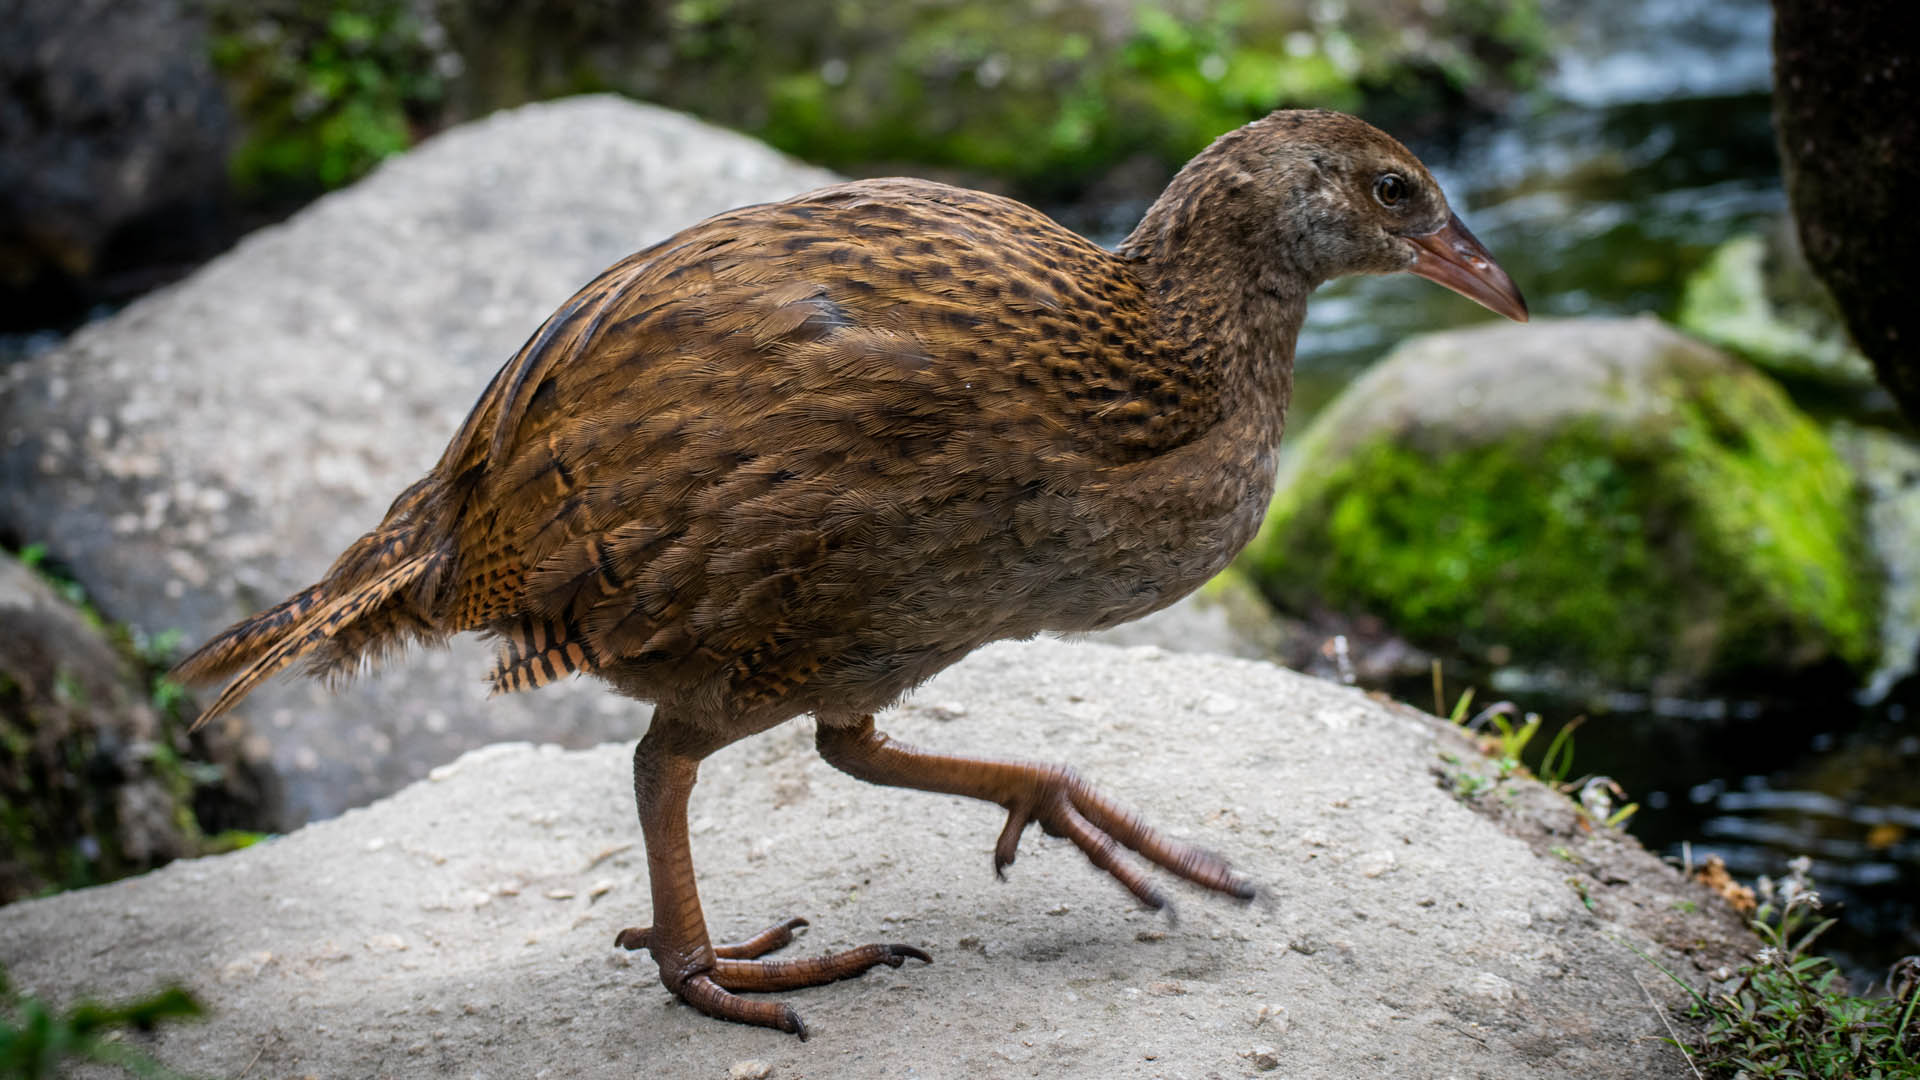 A weka, a flightless bird endemic to New Zealand that's preyed on by invasive mammals and faces competition from other introduced species.